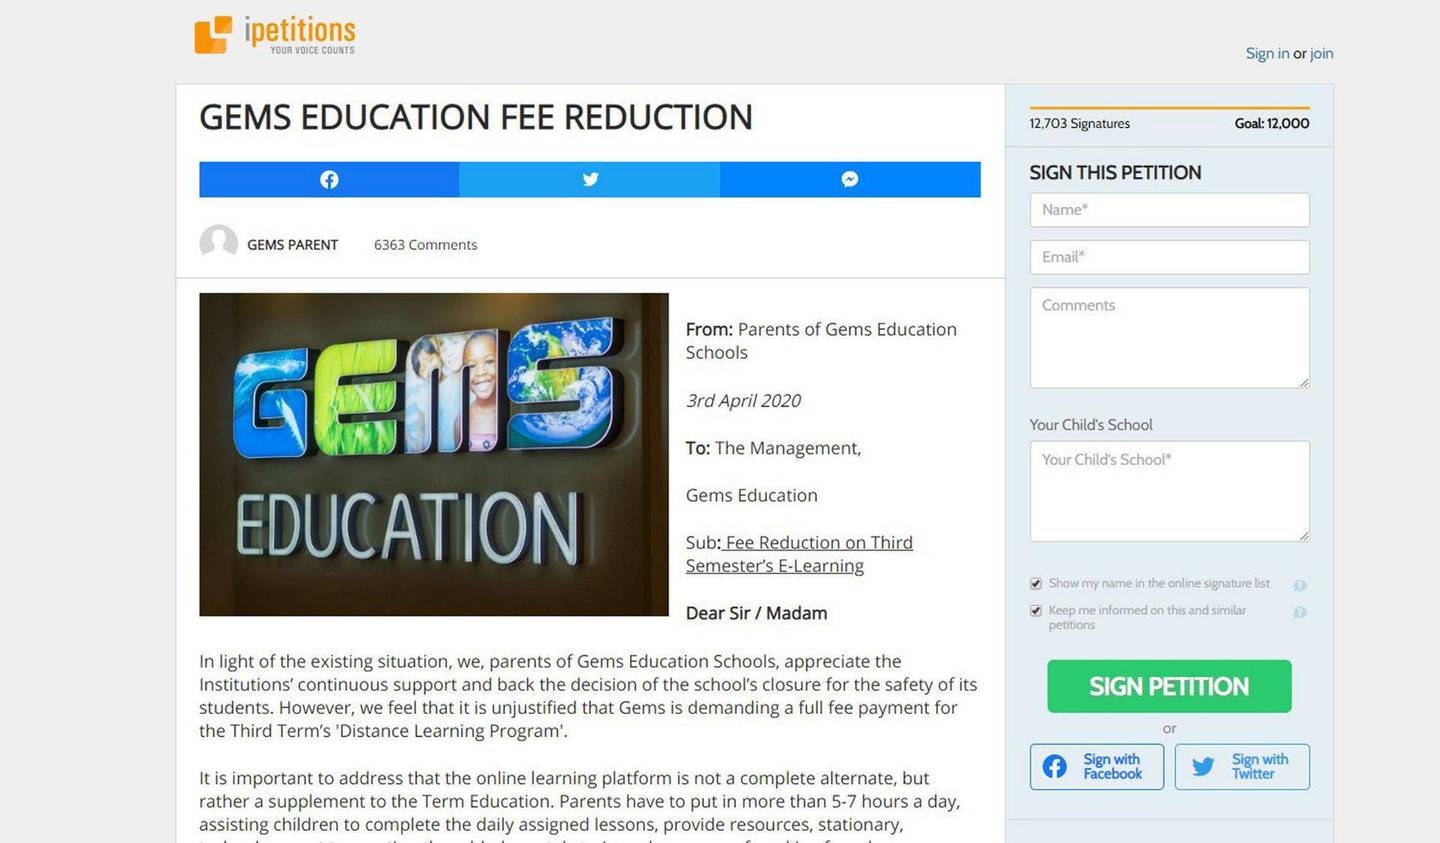 More than 12,000 parents have signed an online plea asking Gems Education to reduce fees by 30 per cent. Courtesy - ipetition.com